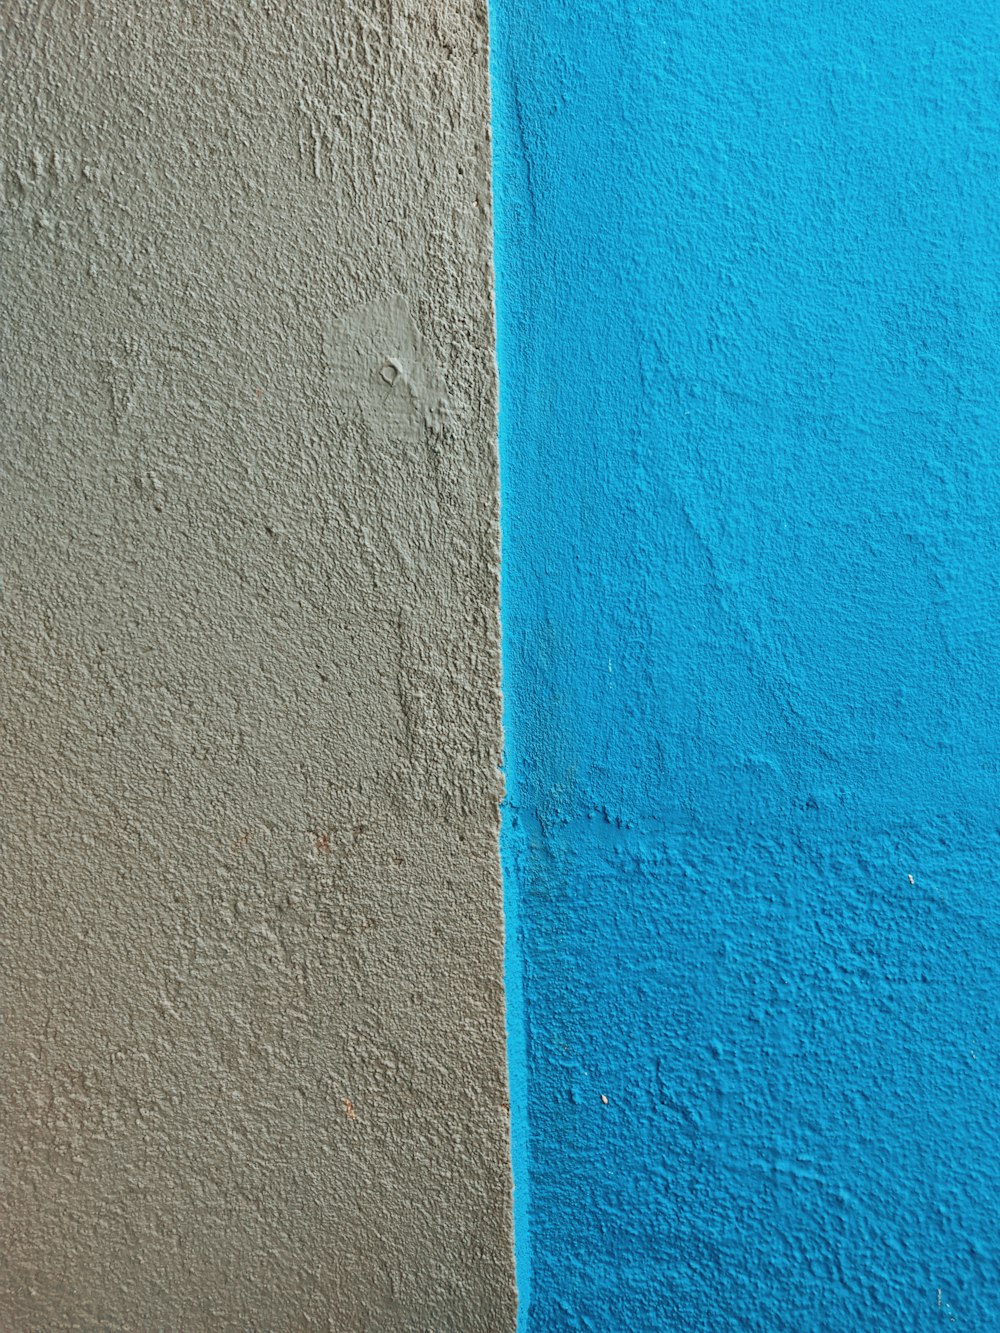 blue and orange painted wall